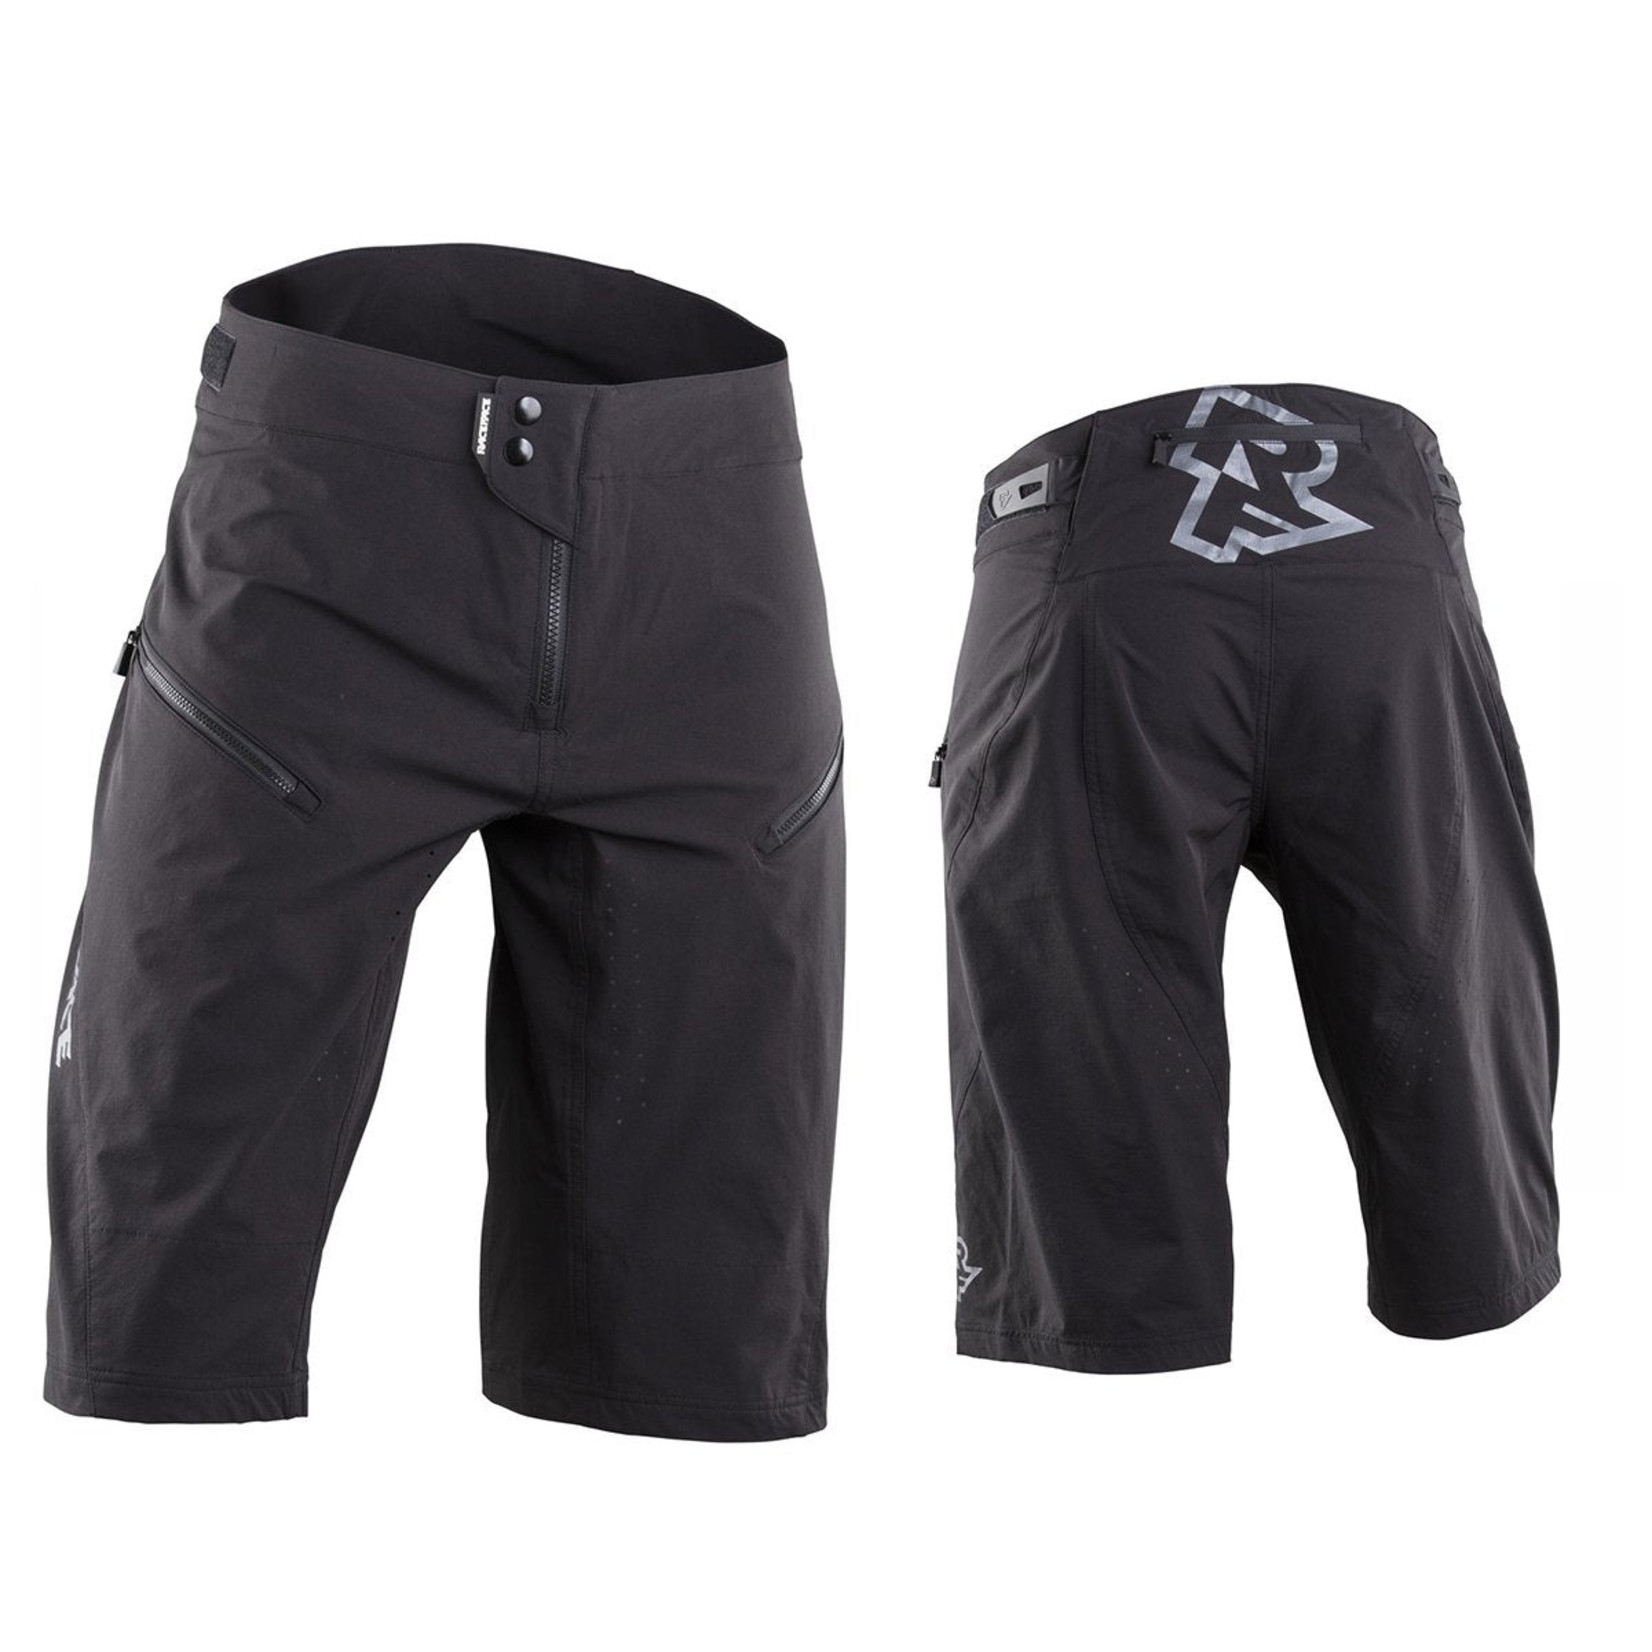 Race Face Indy Shorts